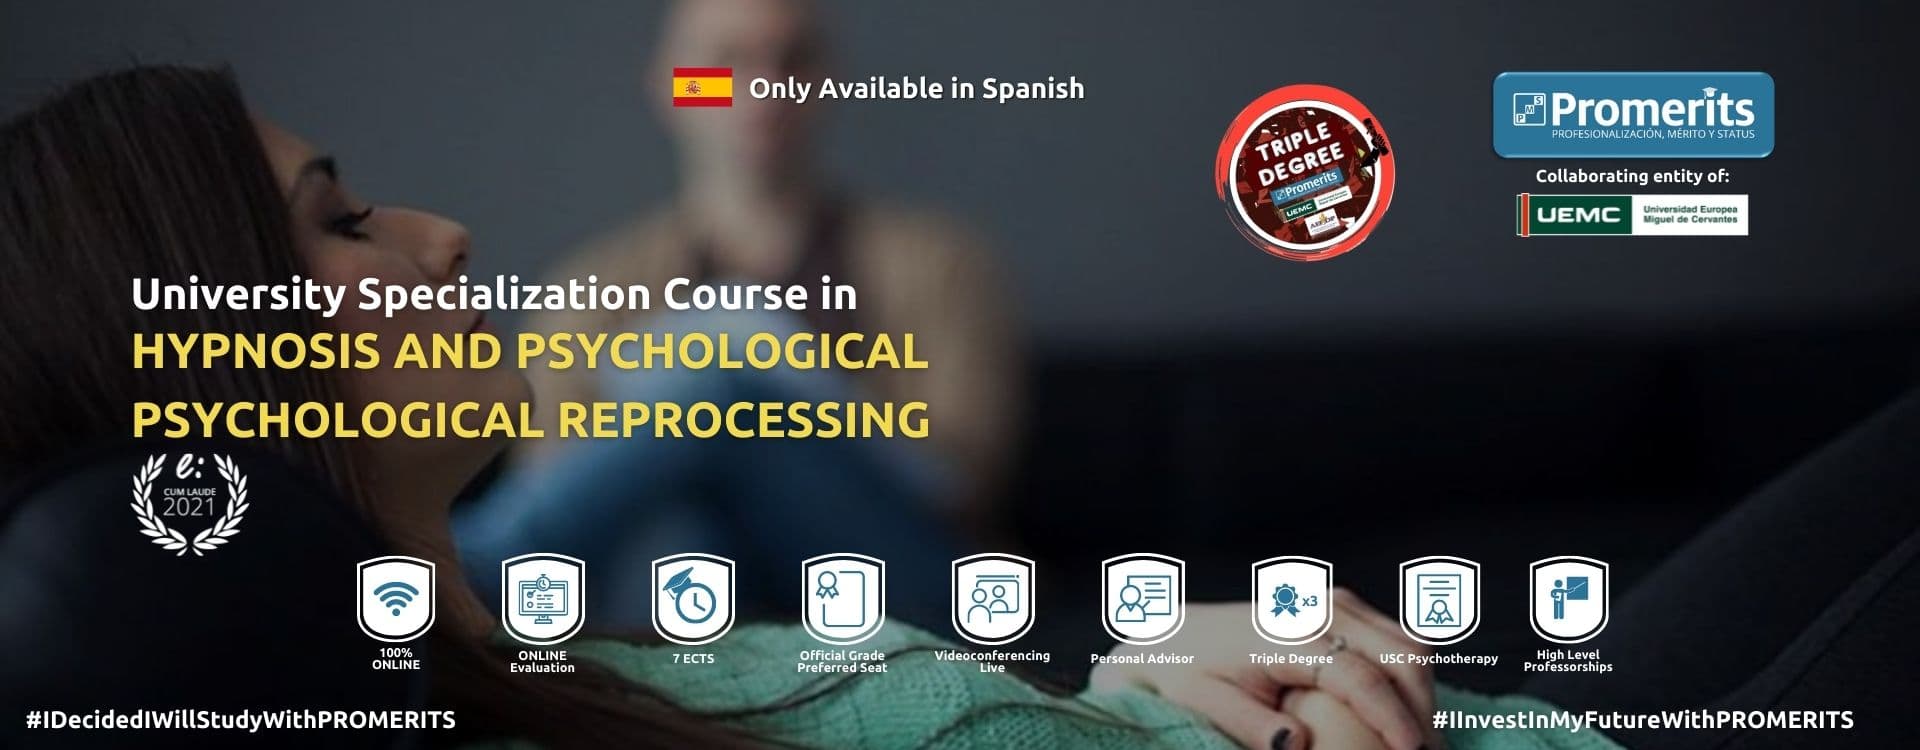 USC HYPNOSIS AND PSYCHOLOGICAL PSYCHOLOGICAL REPROCESSING